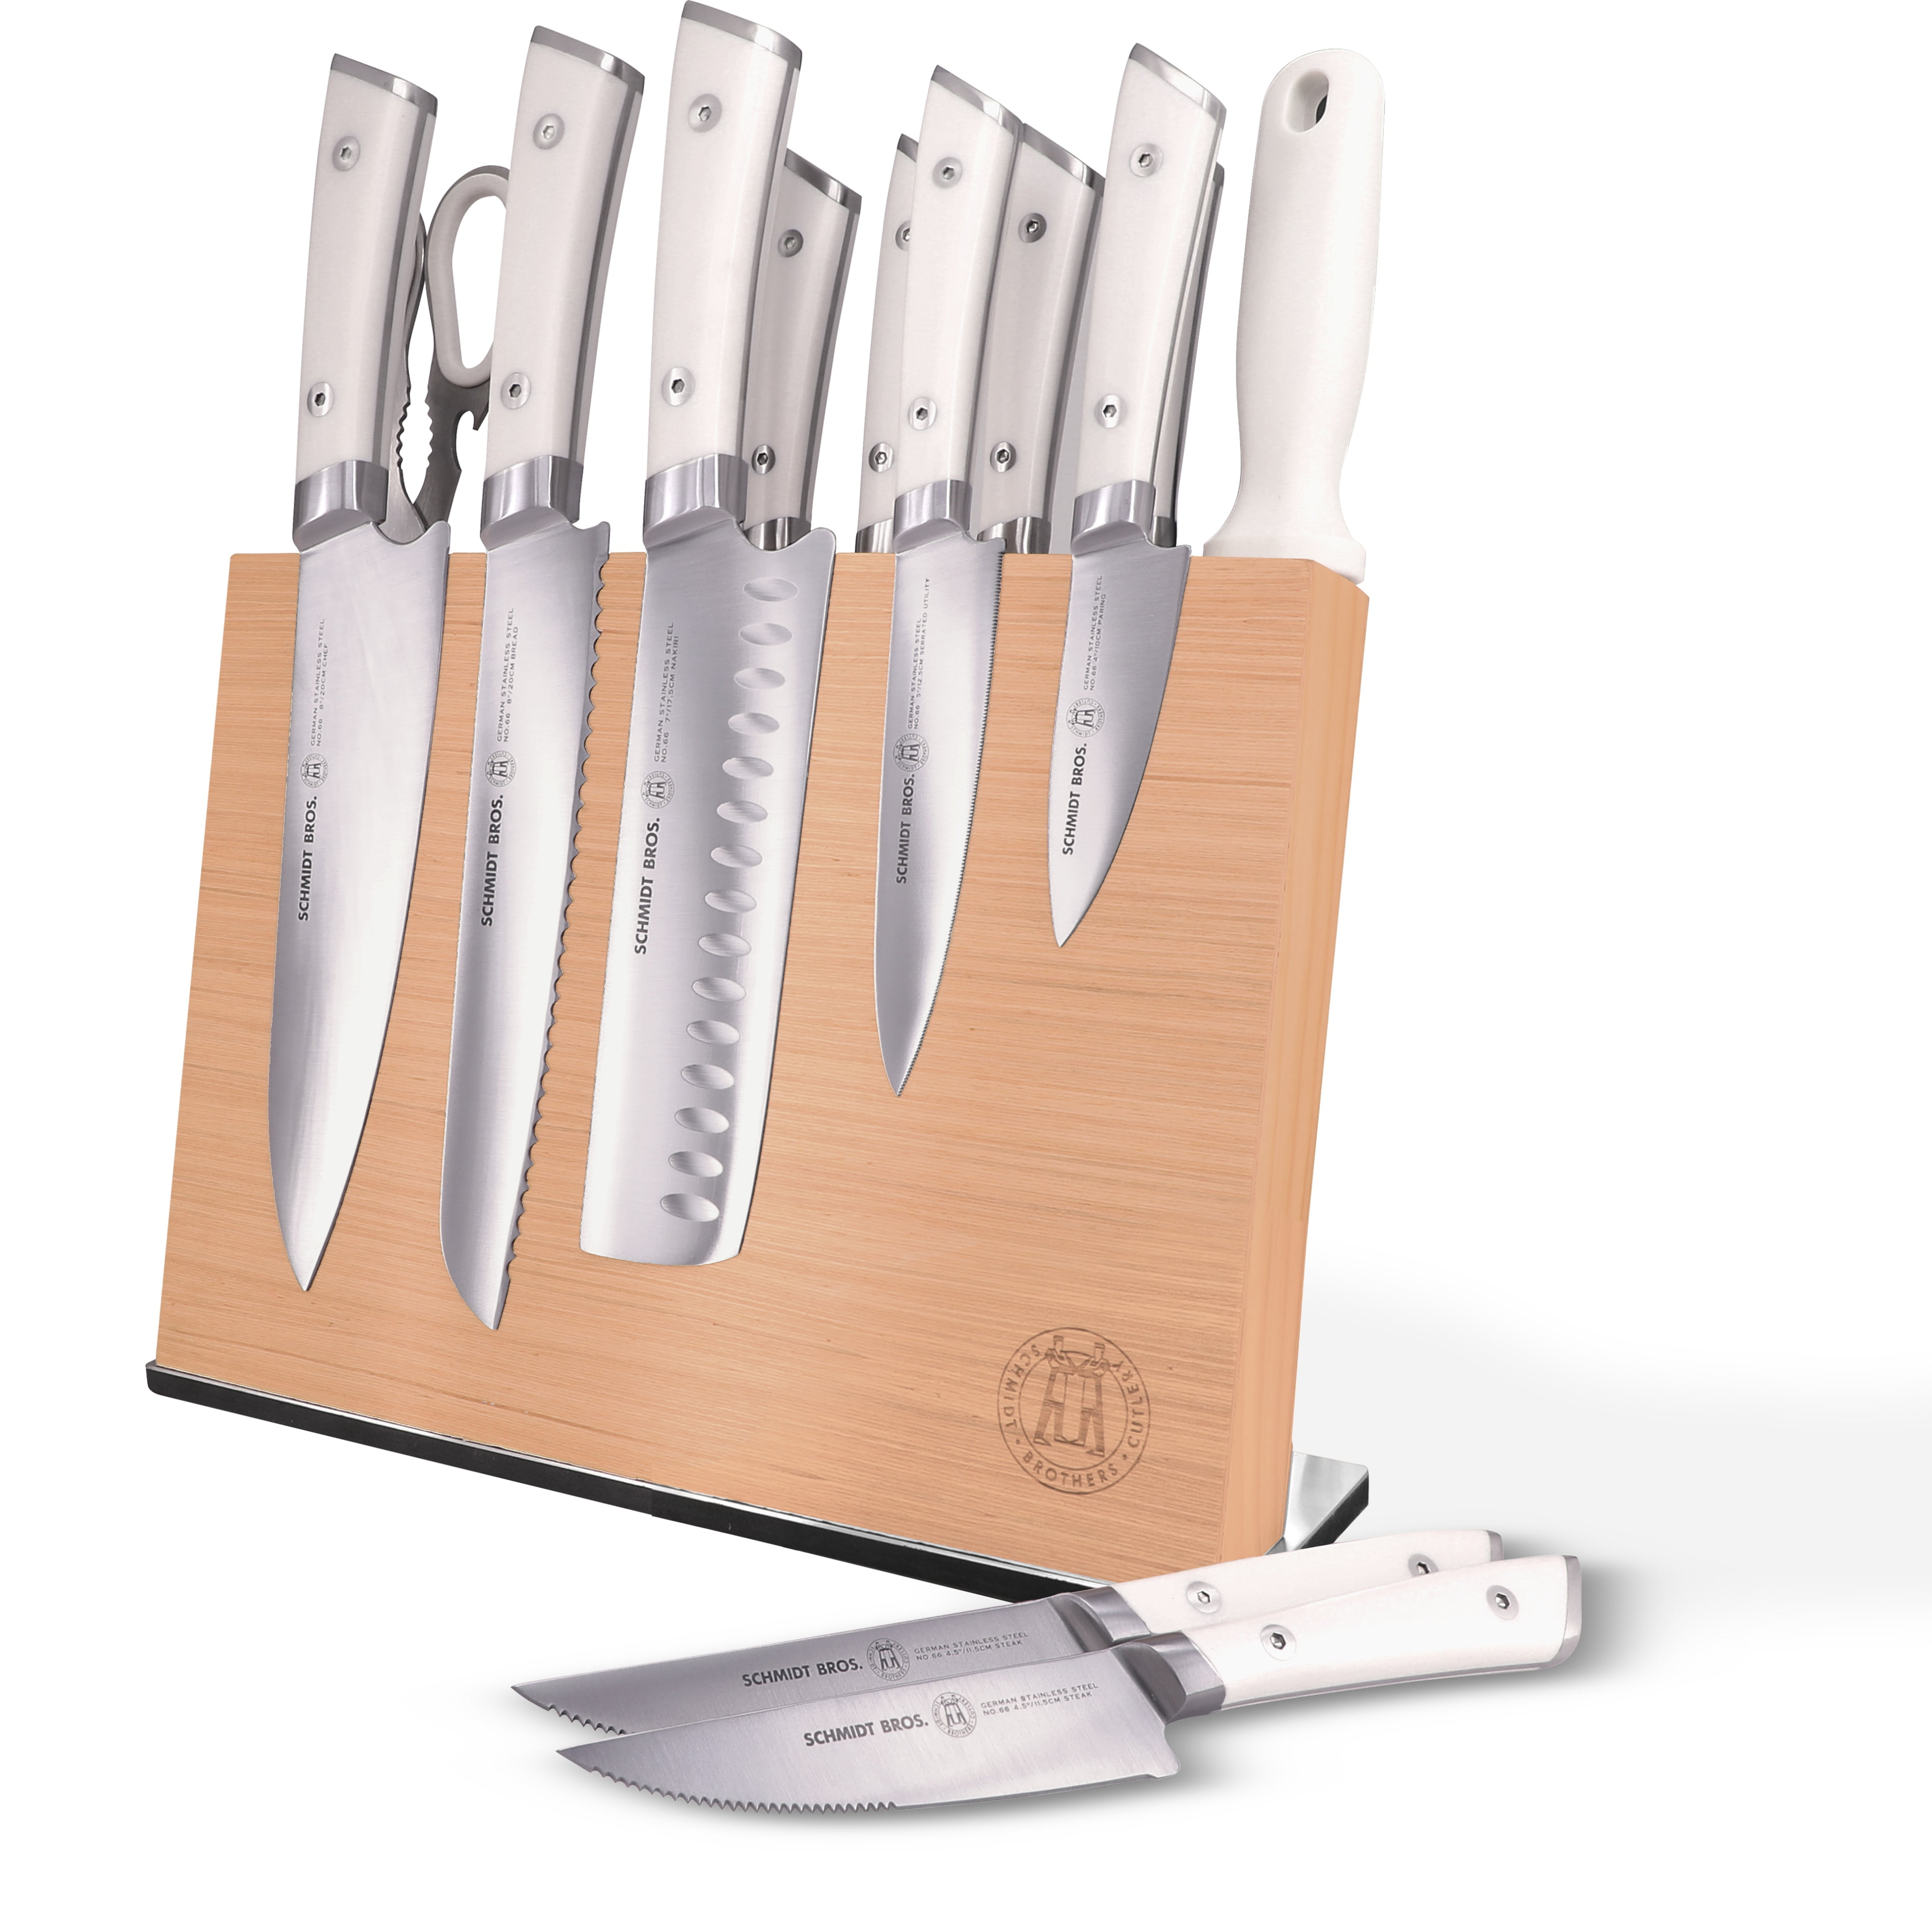  Kitchen Knife Set - 1829 CARL SCHMIDT SOHN 15 Pieces Knife  Block Set with Sharpener, Forged Stainless Steel, Professional Chef Block  Set with Ergonomic Handle, Kitchen Tool Set, World-Class Sharpness: Home